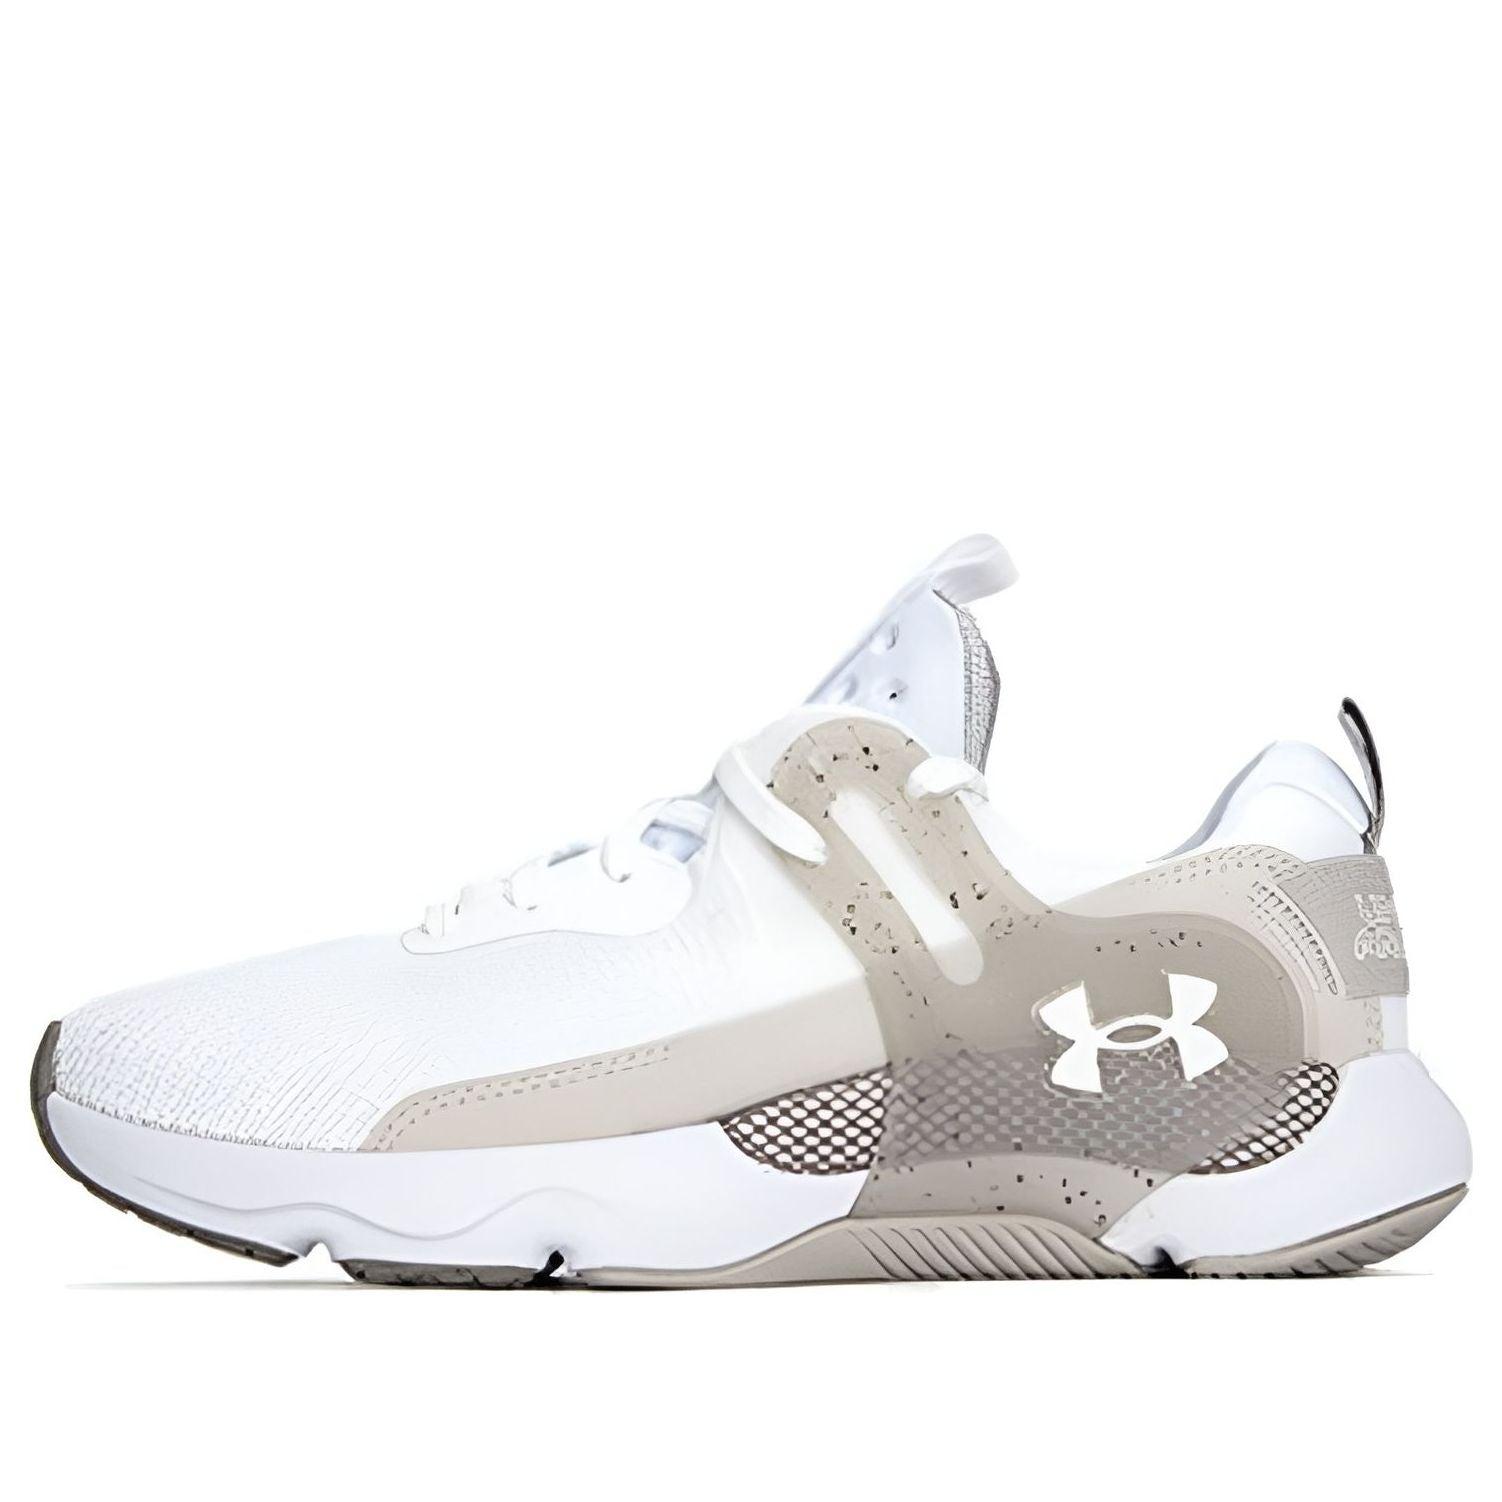 Under Armour Hovr Apex 3 Training Shoes in White | Lyst